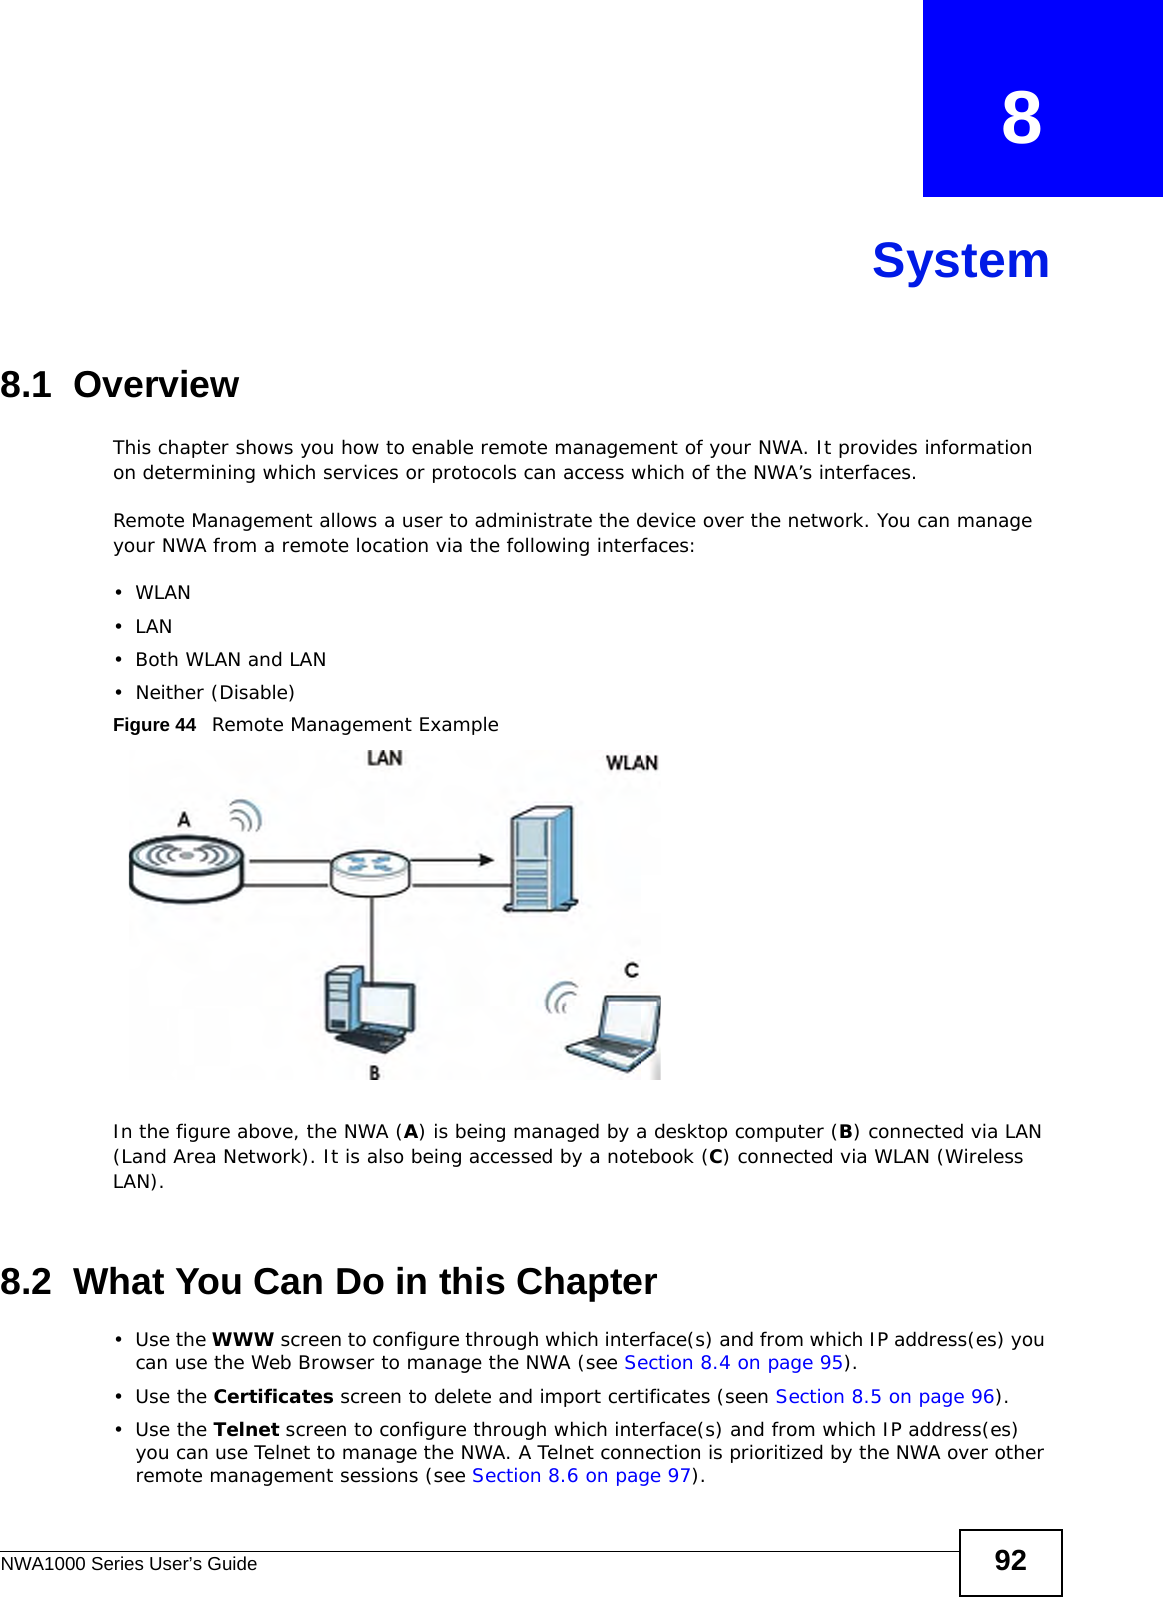 NWA1000 Series User’s Guide 92CHAPTER   8System8.1  OverviewThis chapter shows you how to enable remote management of your NWA. It provides information on determining which services or protocols can access which of the NWA’s interfaces.Remote Management allows a user to administrate the device over the network. You can manage your NWA from a remote location via the following interfaces:•WLAN•LAN•Both WLAN and LAN• Neither (Disable)Figure 44   Remote Management ExampleIn the figure above, the NWA (A) is being managed by a desktop computer (B) connected via LAN (Land Area Network). It is also being accessed by a notebook (C) connected via WLAN (Wireless LAN).8.2  What You Can Do in this Chapter•Use the WWW screen to configure through which interface(s) and from which IP address(es) you can use the Web Browser to manage the NWA (see Section 8.4 on page 95). •Use the Certificates screen to delete and import certificates (seen Section 8.5 on page 96).•Use the Telnet screen to configure through which interface(s) and from which IP address(es) you can use Telnet to manage the NWA. A Telnet connection is prioritized by the NWA over other remote management sessions (see Section 8.6 on page 97). 